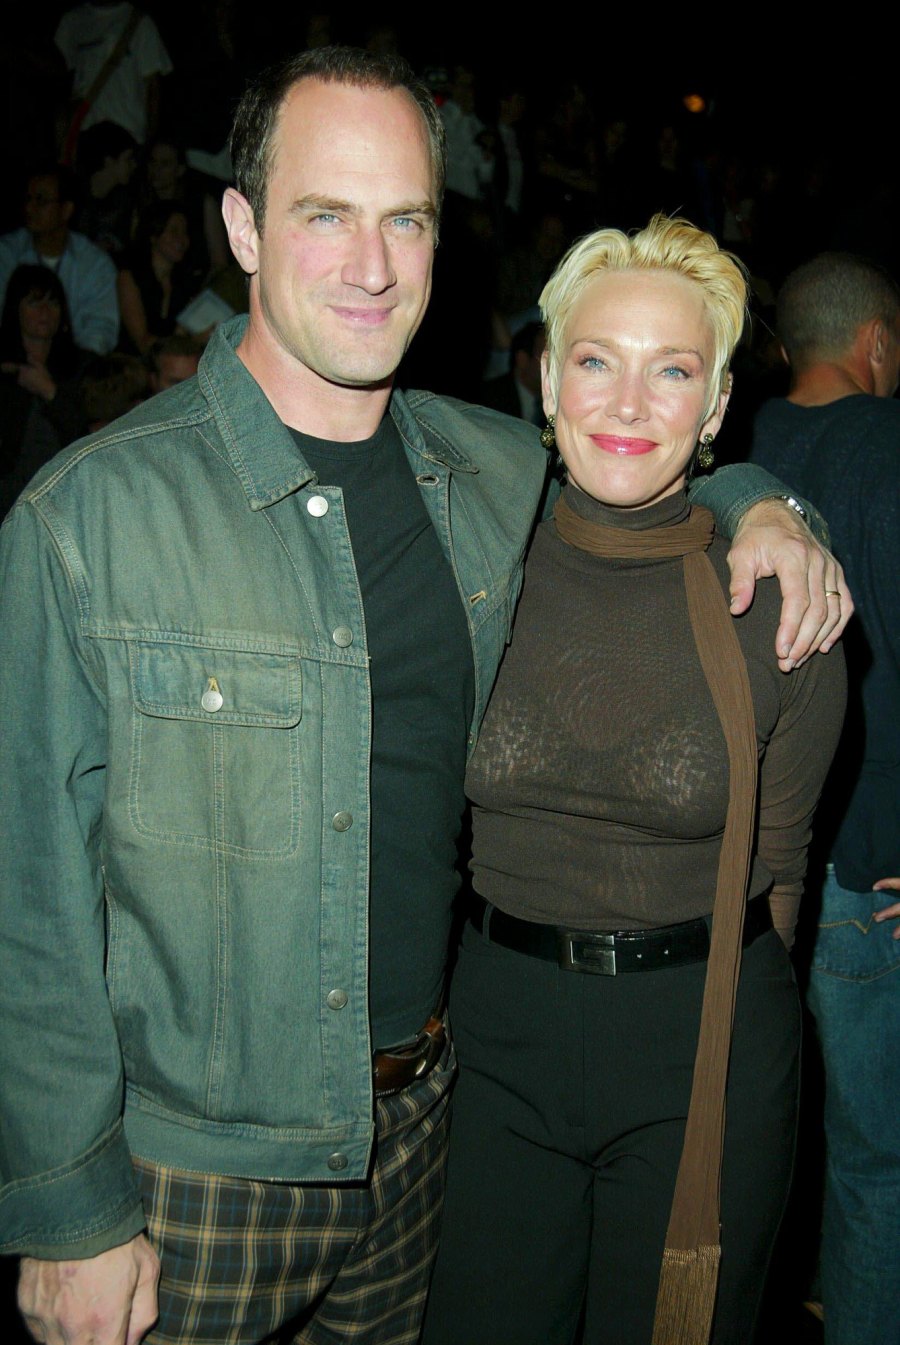 Christopher Meloni and Wife Doris Sherman Meloni’s Relationship Timeline - 385 KENNETH COLE SPRING 2003 FASHION SHOW, NEW YORK, AMERICA - 18 SEP 2002